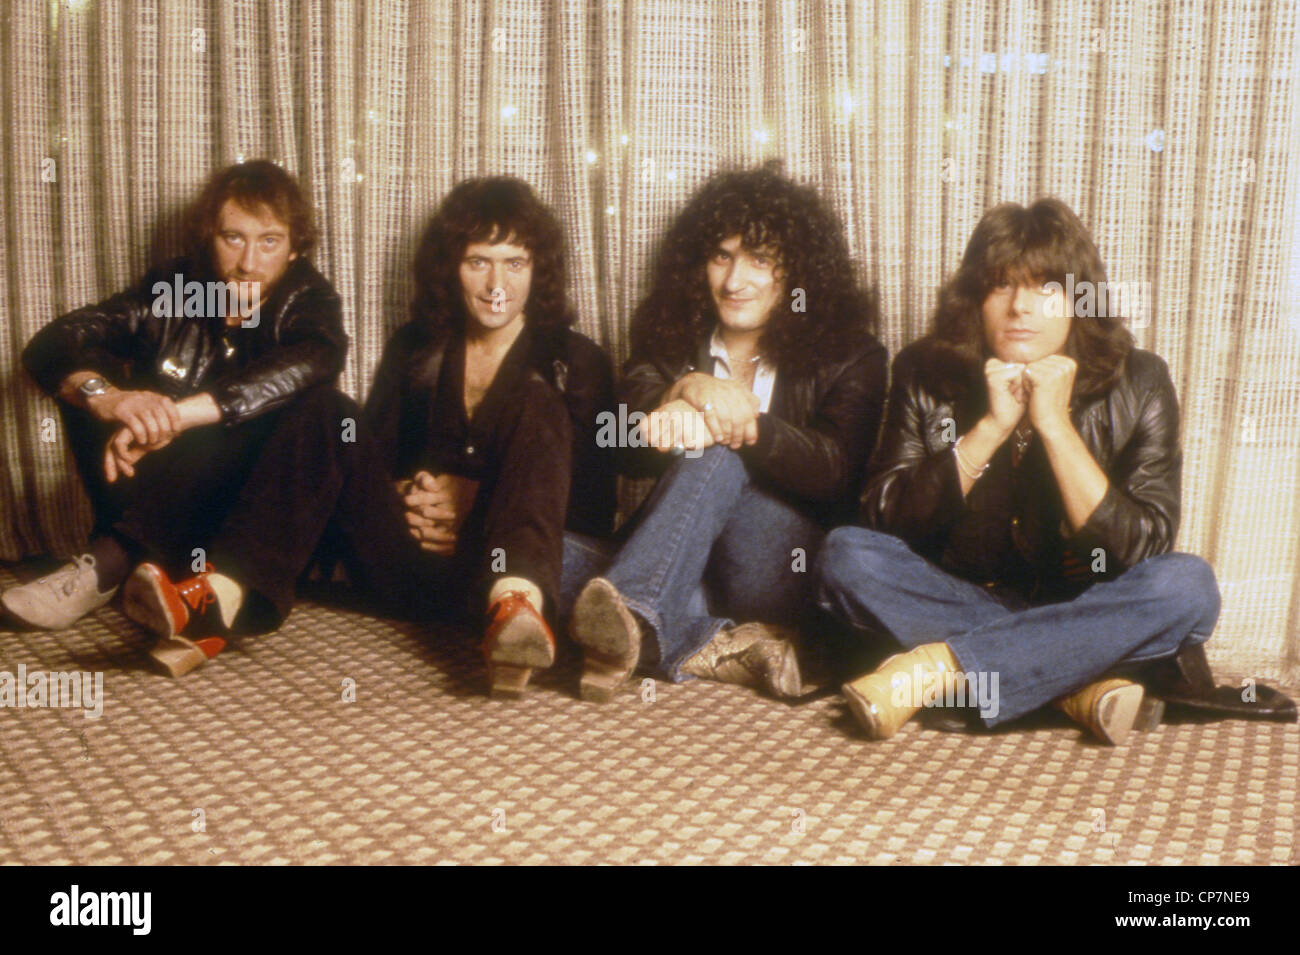 RAINBOW UK rock group about 1980 with Ritchie Blackmore second from left. Photo Laurens van Houten Stock Photo